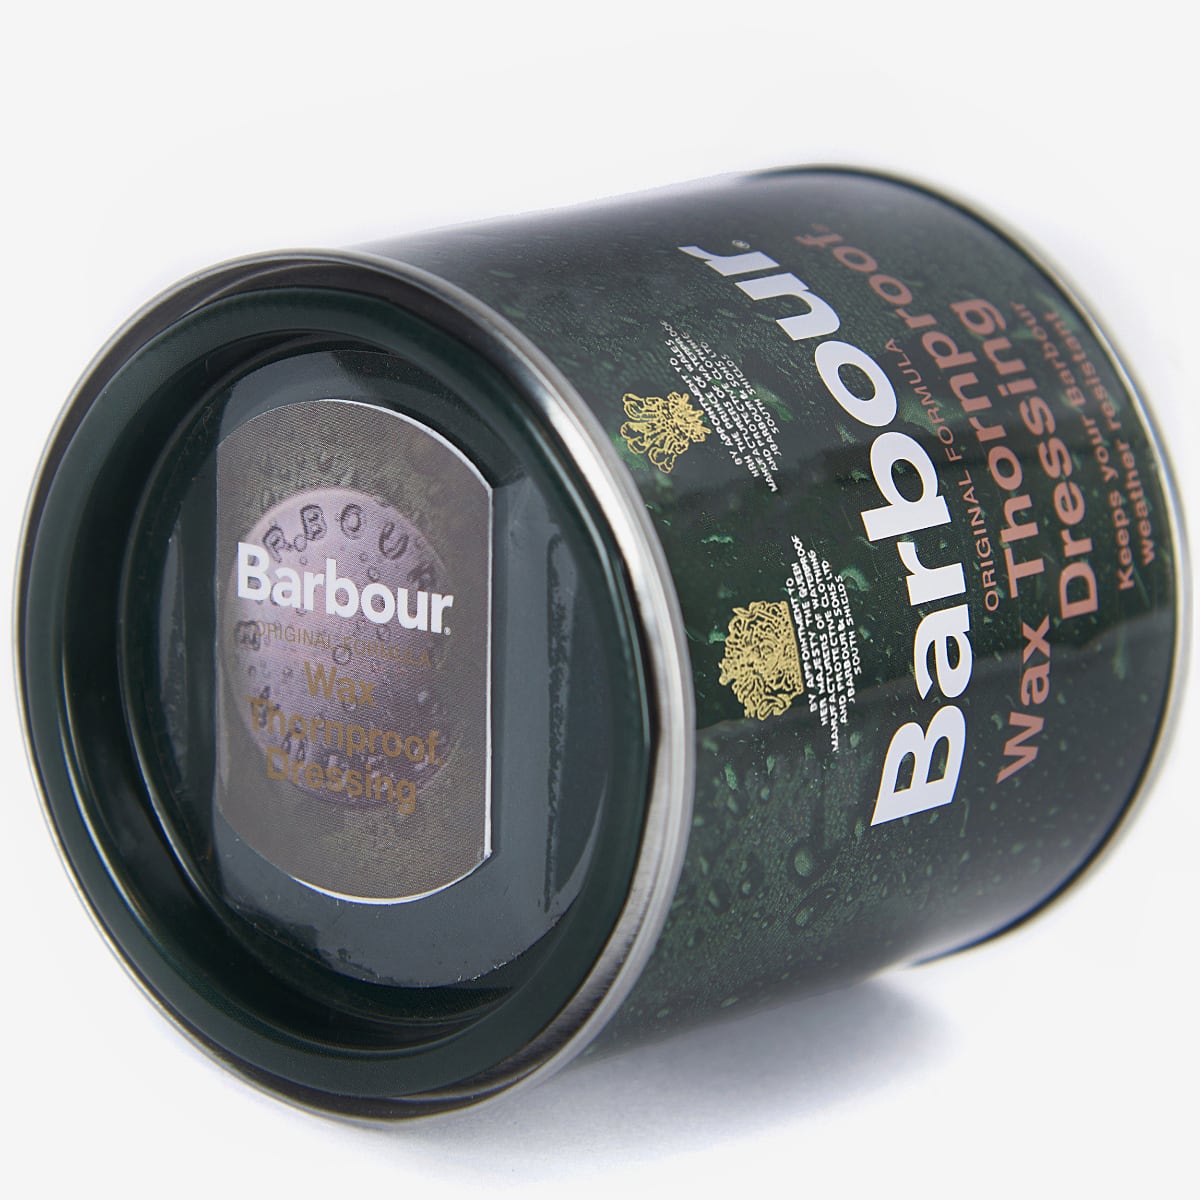 Barbour Wax Dressing 200ml